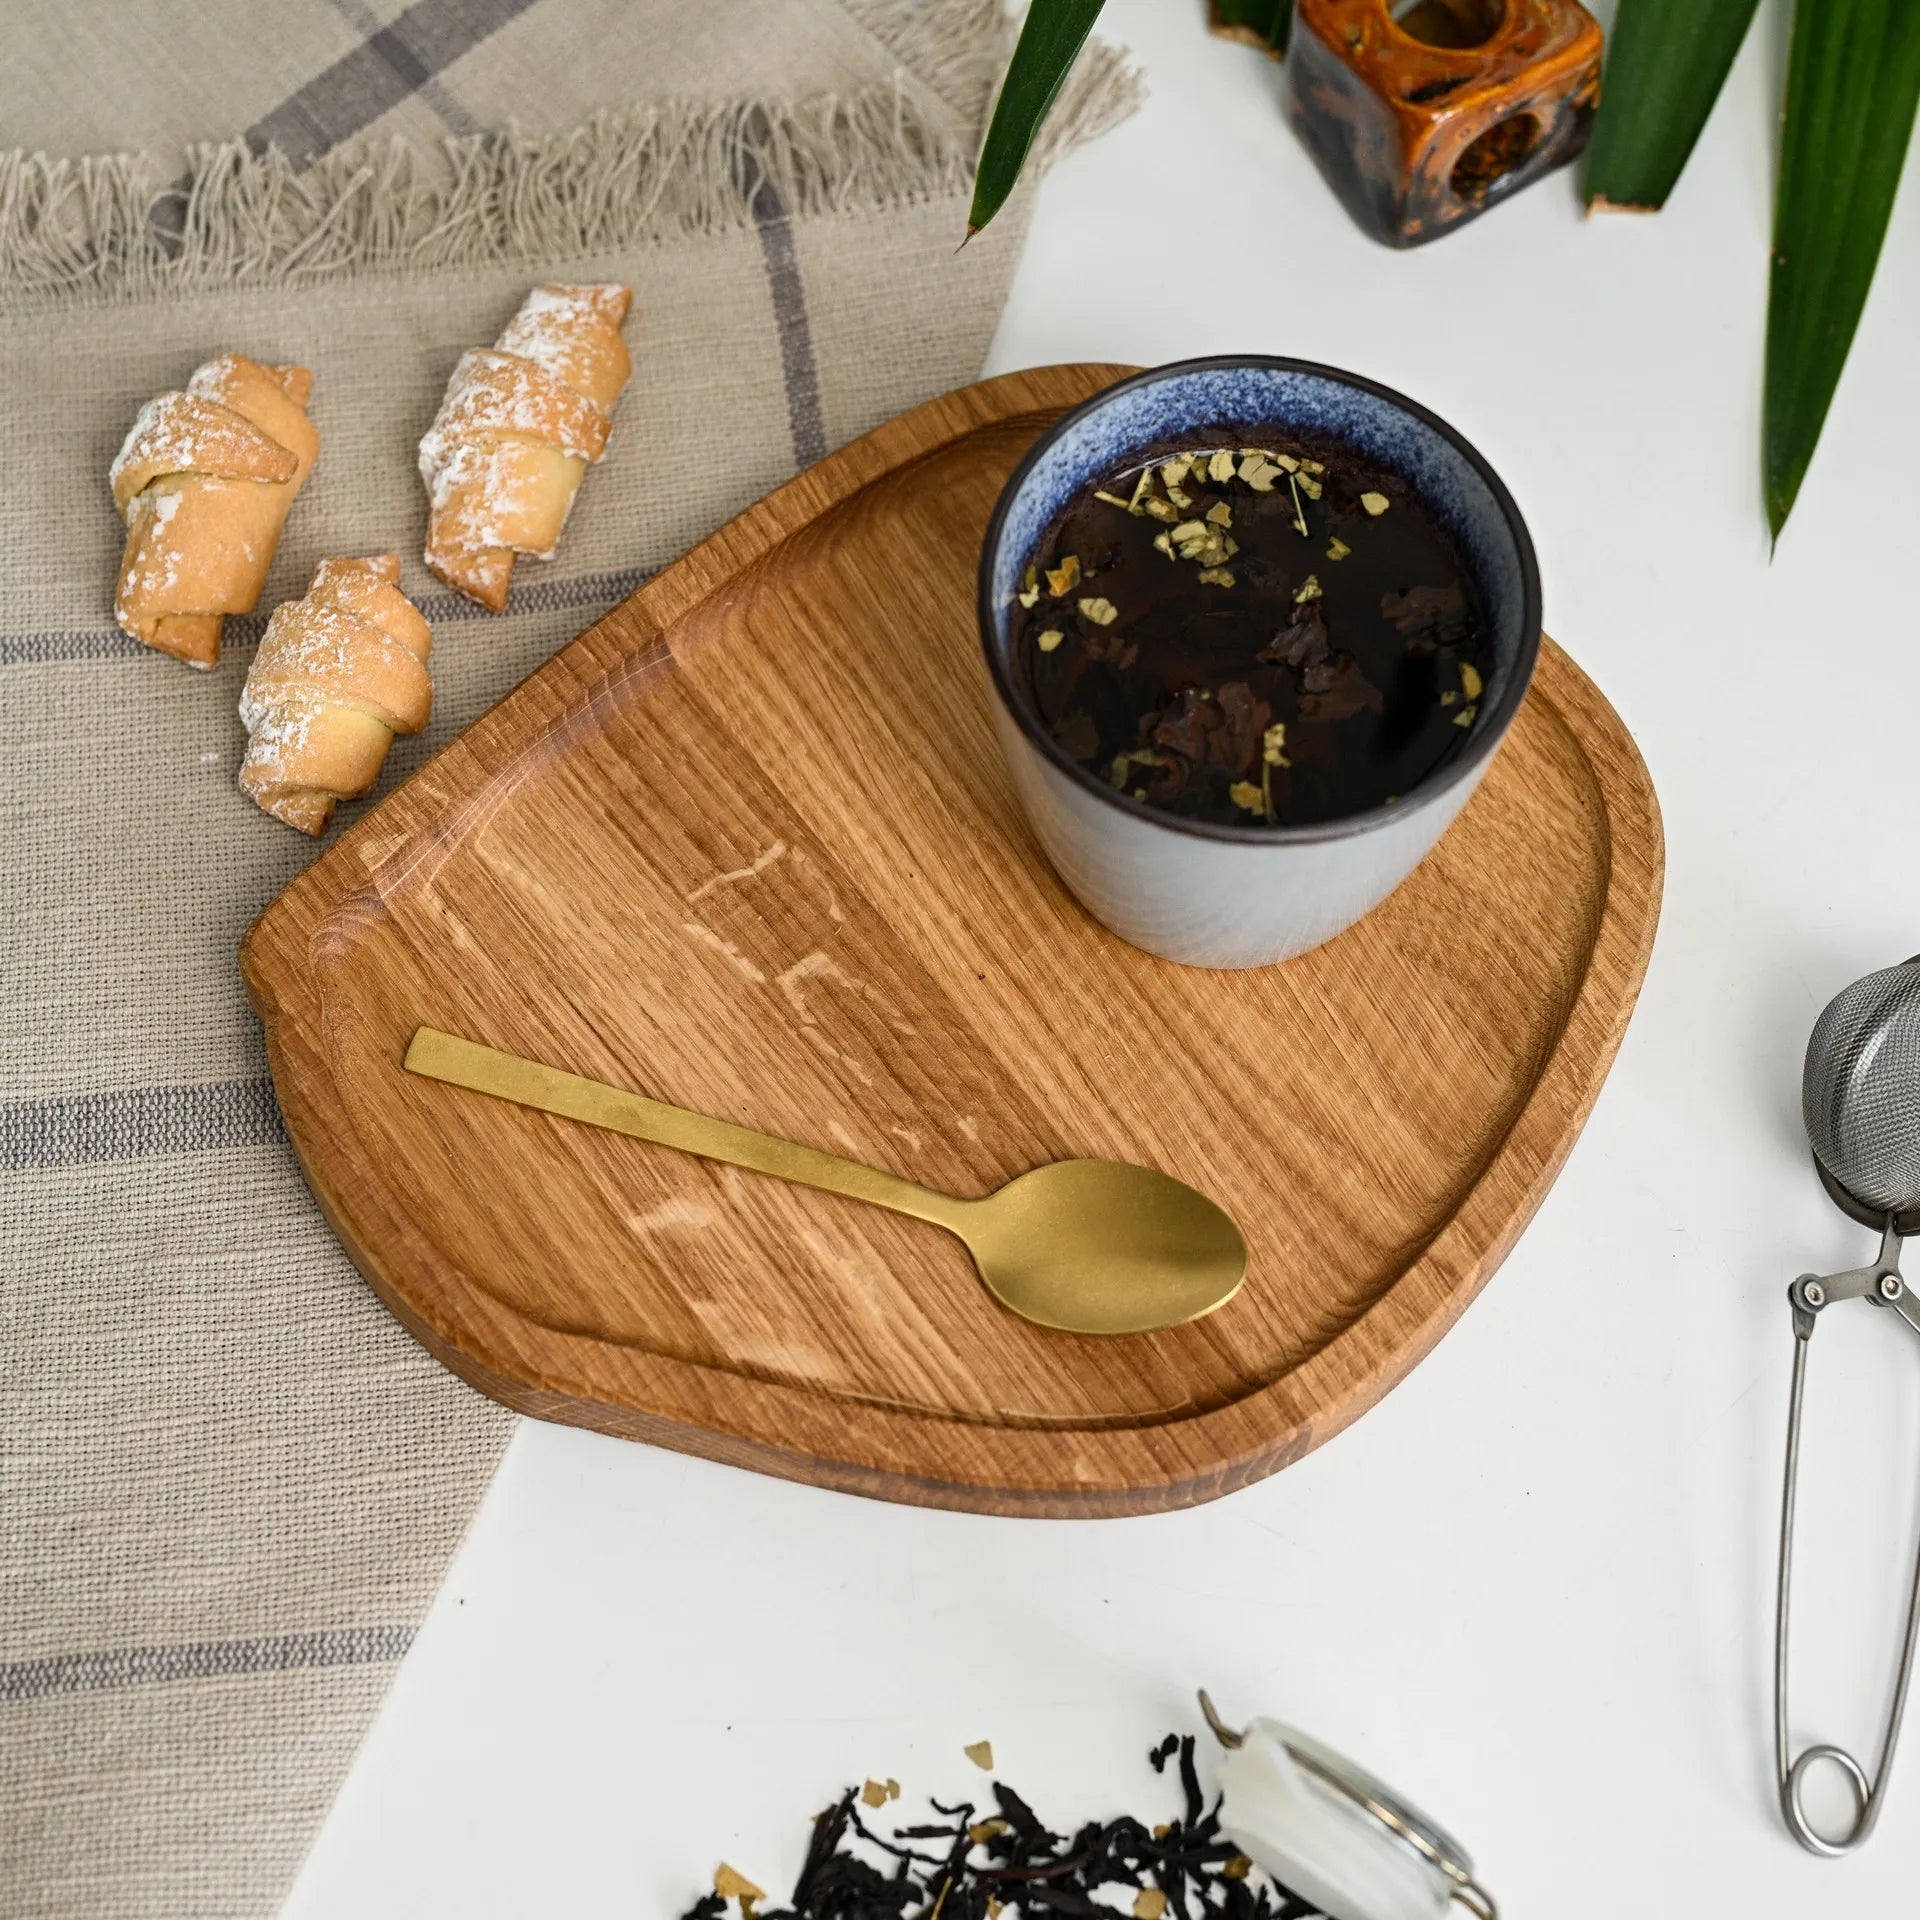 Decorative rustic tray for serving coffee and tea in hotels